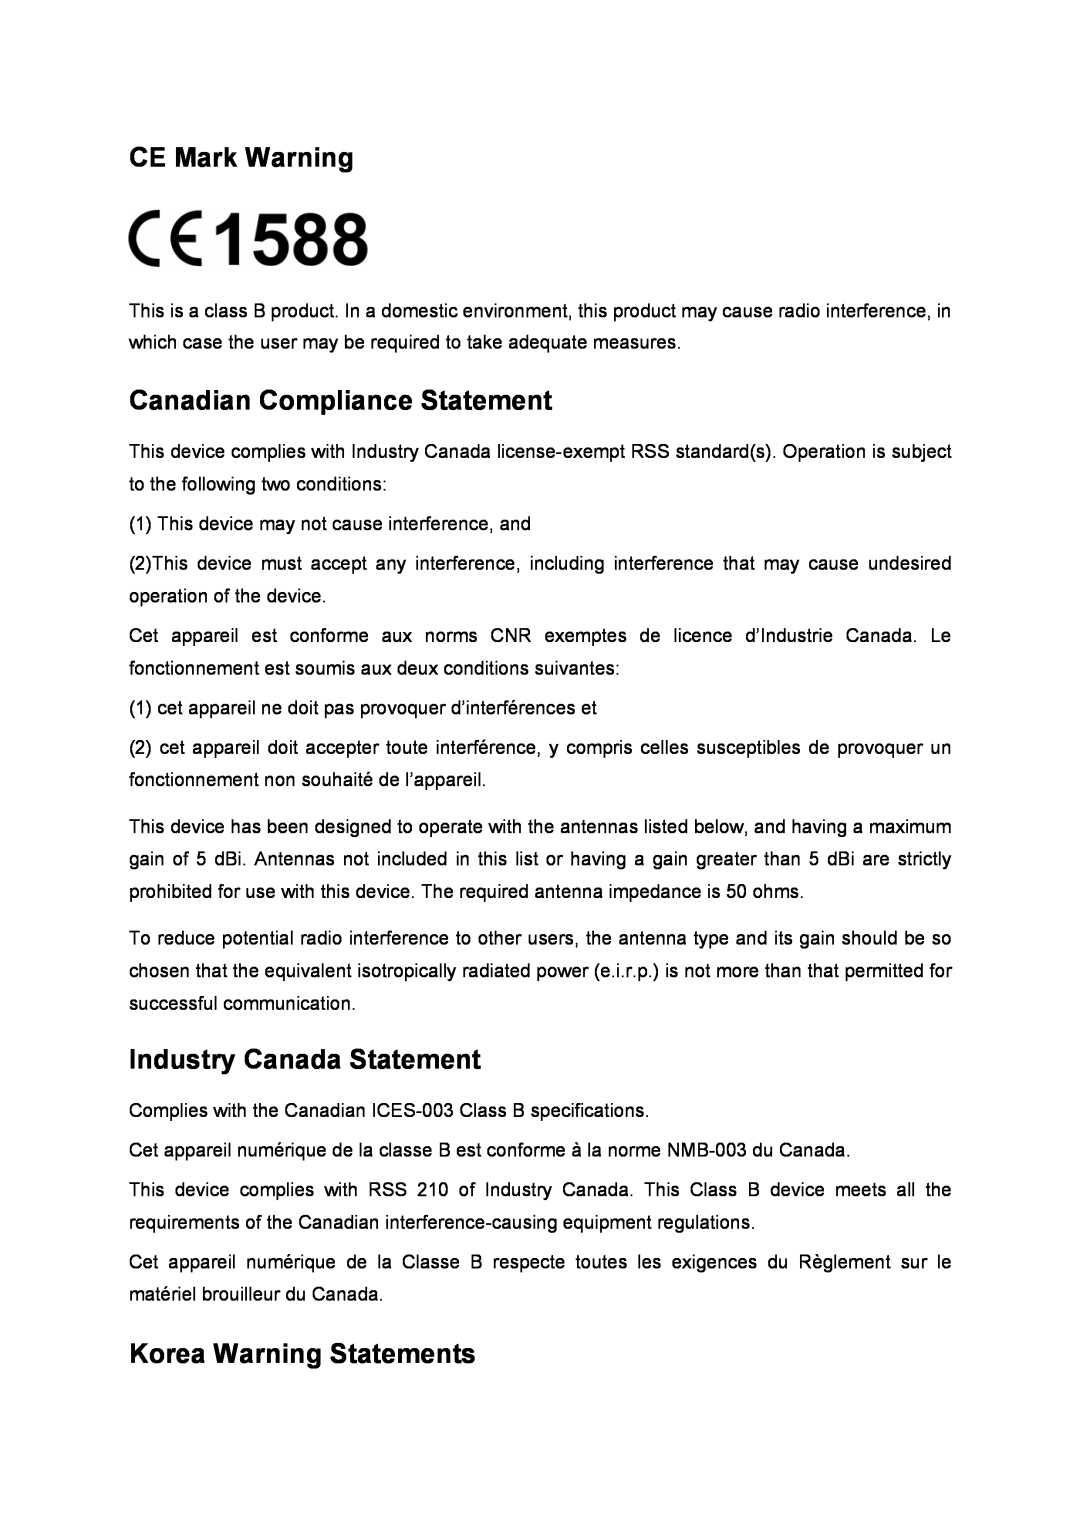 TP-Link td-w8951nd CE Mark Warning, Canadian Compliance Statement, Industry Canada Statement, Korea Warning Statements 